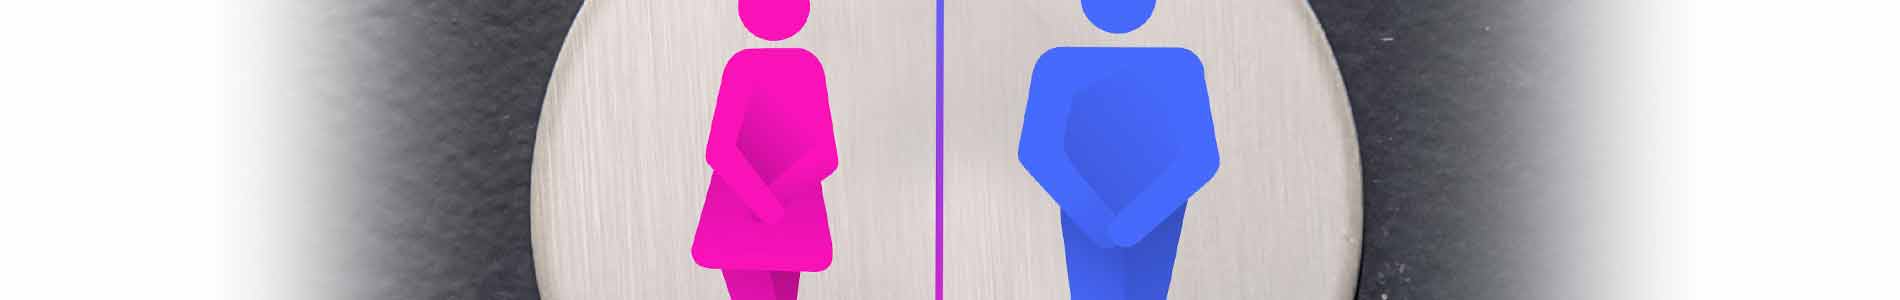 Gray circle with a pink female and blue male icon inside, both crossing their legs tightly representing urinary incontinence